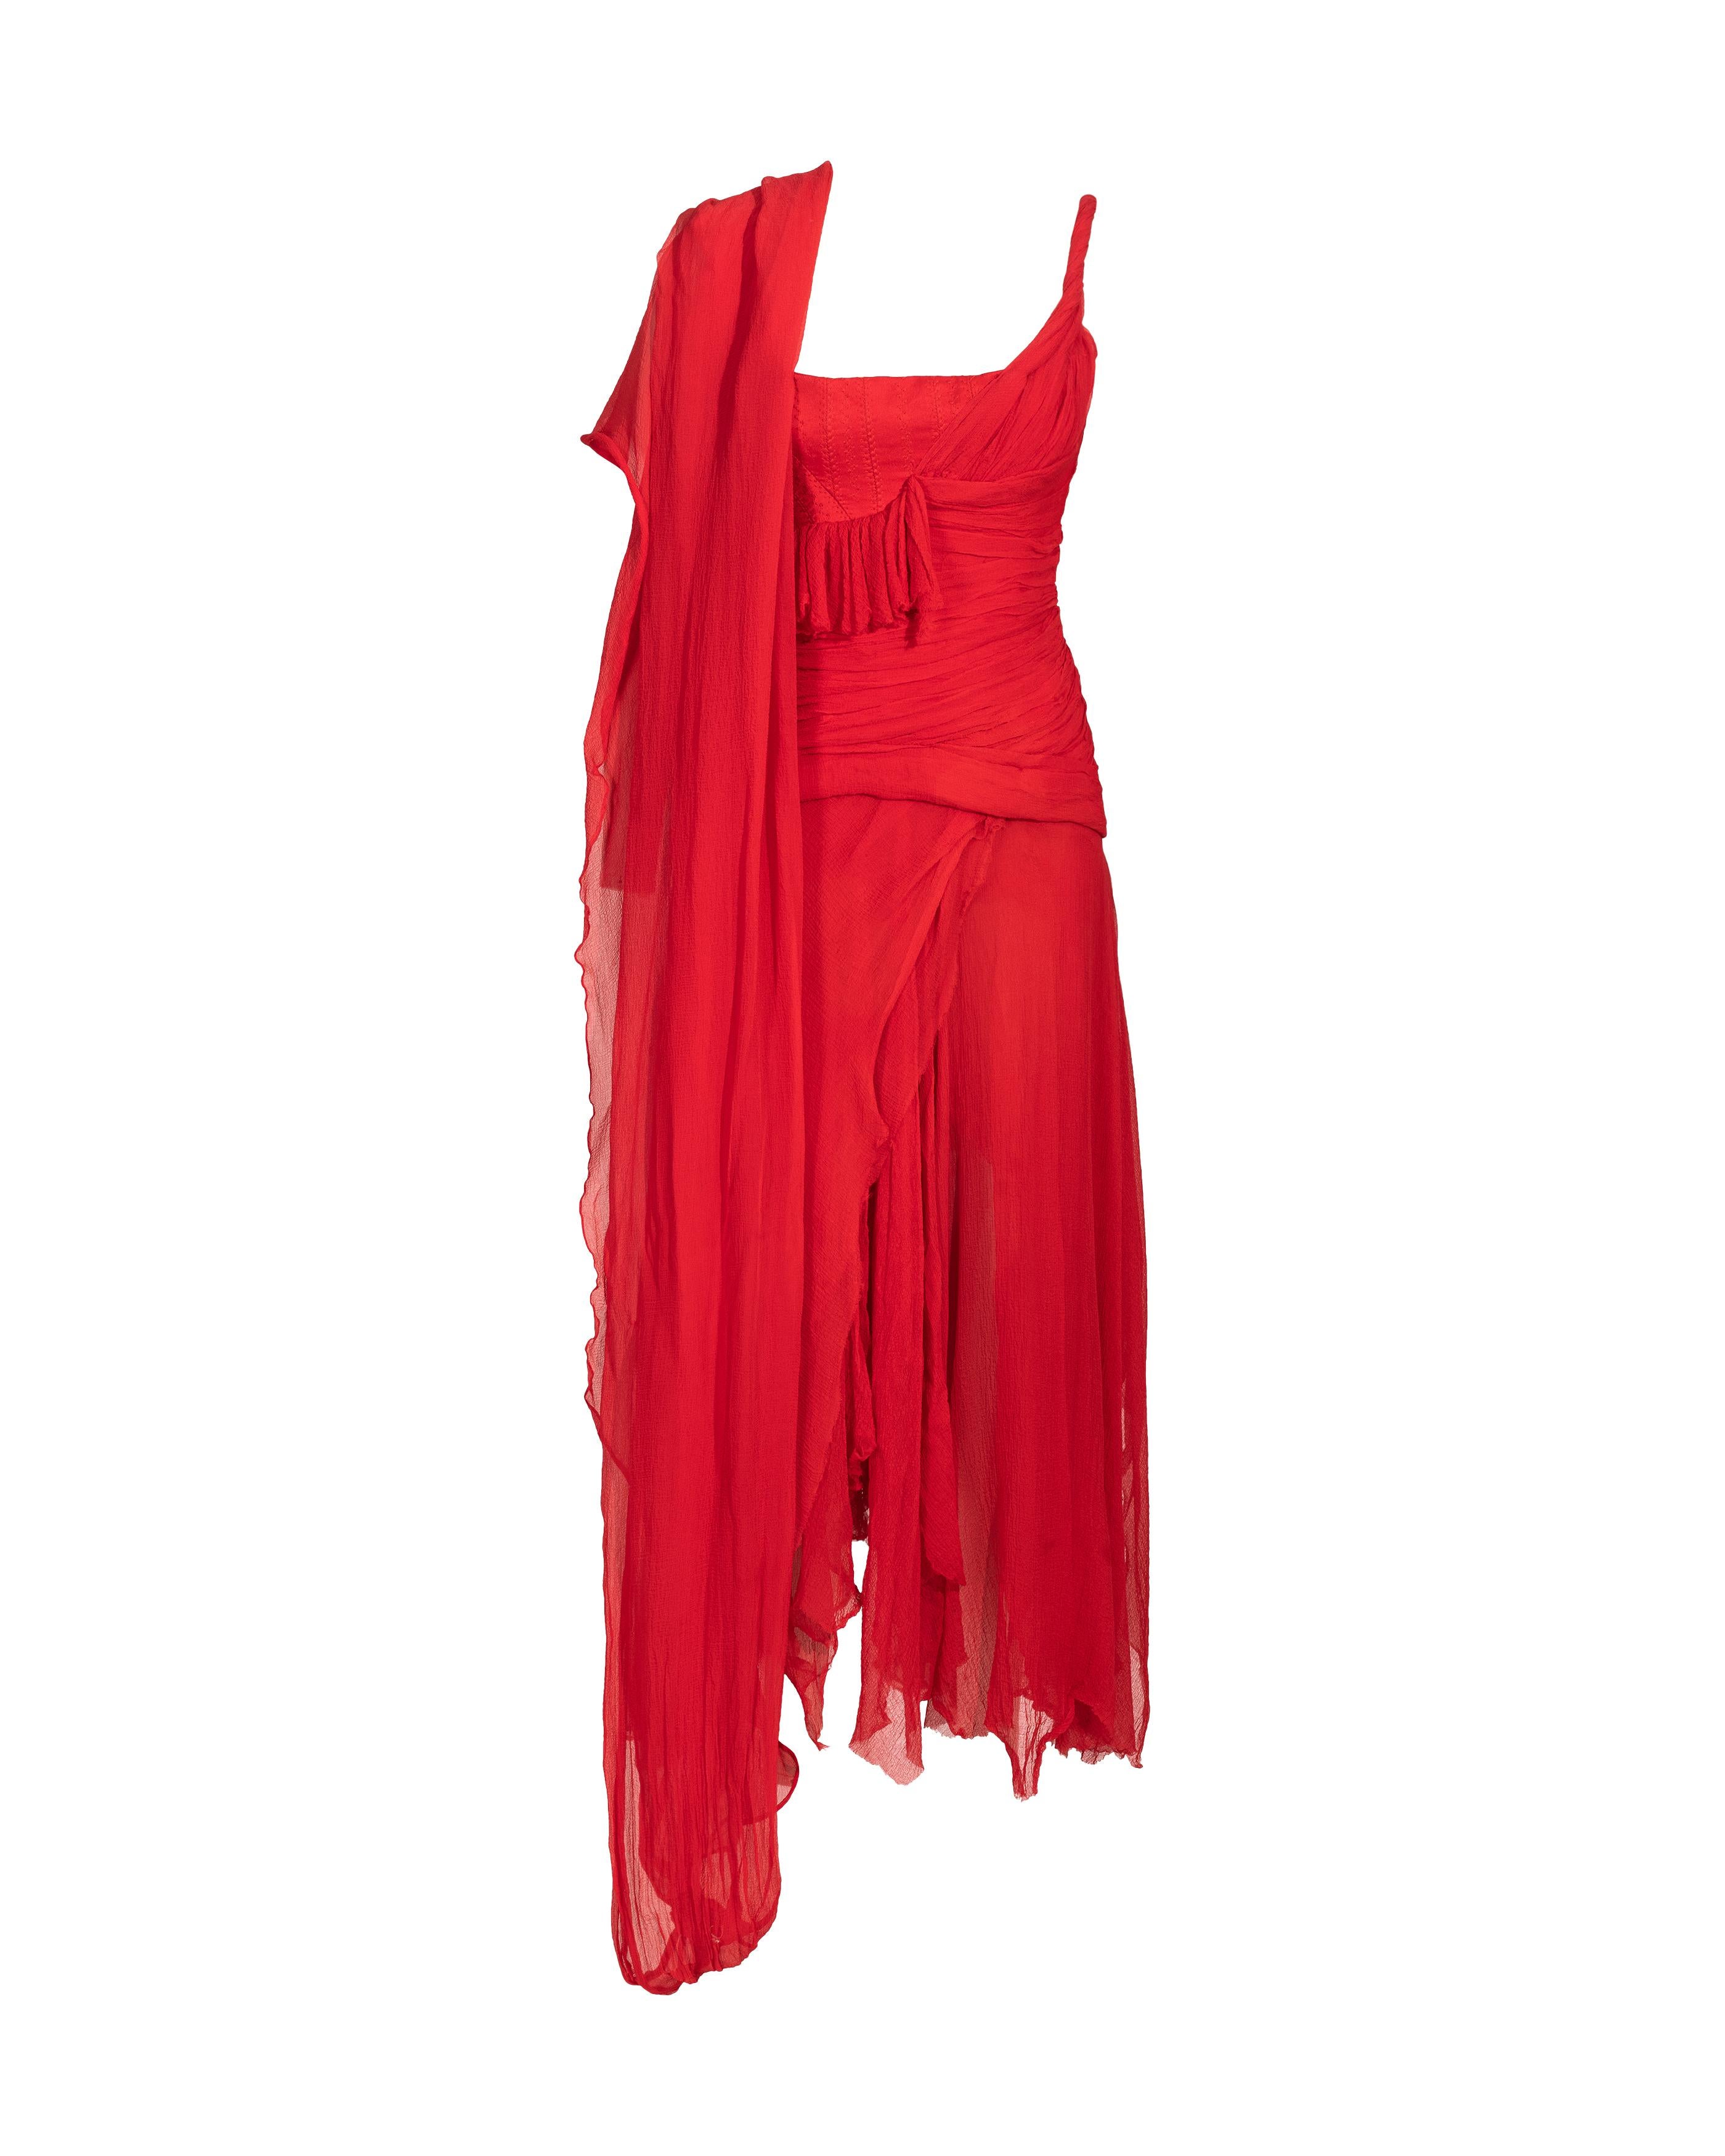 S/S 2003 Alexander McQueen  'Irere' Collection Red Silk Chiffon Gown with Sash In Good Condition In North Hollywood, CA